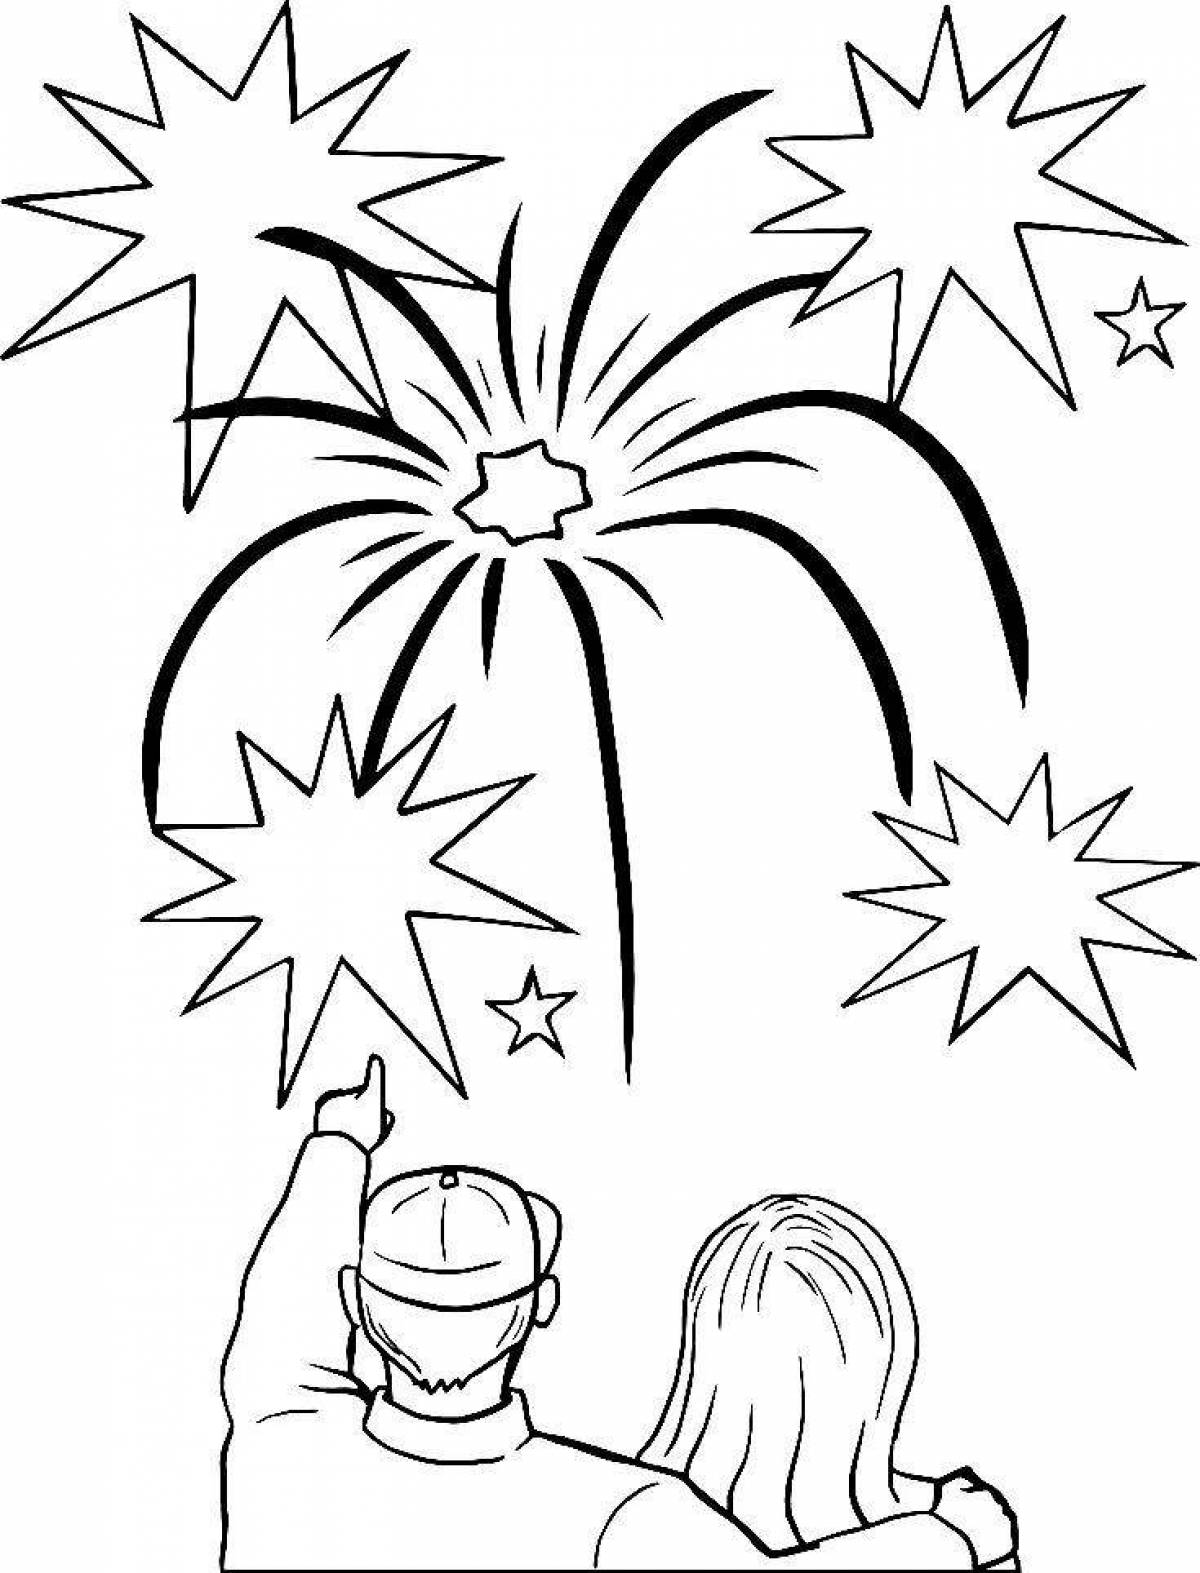 Colourful fireworks coloring book